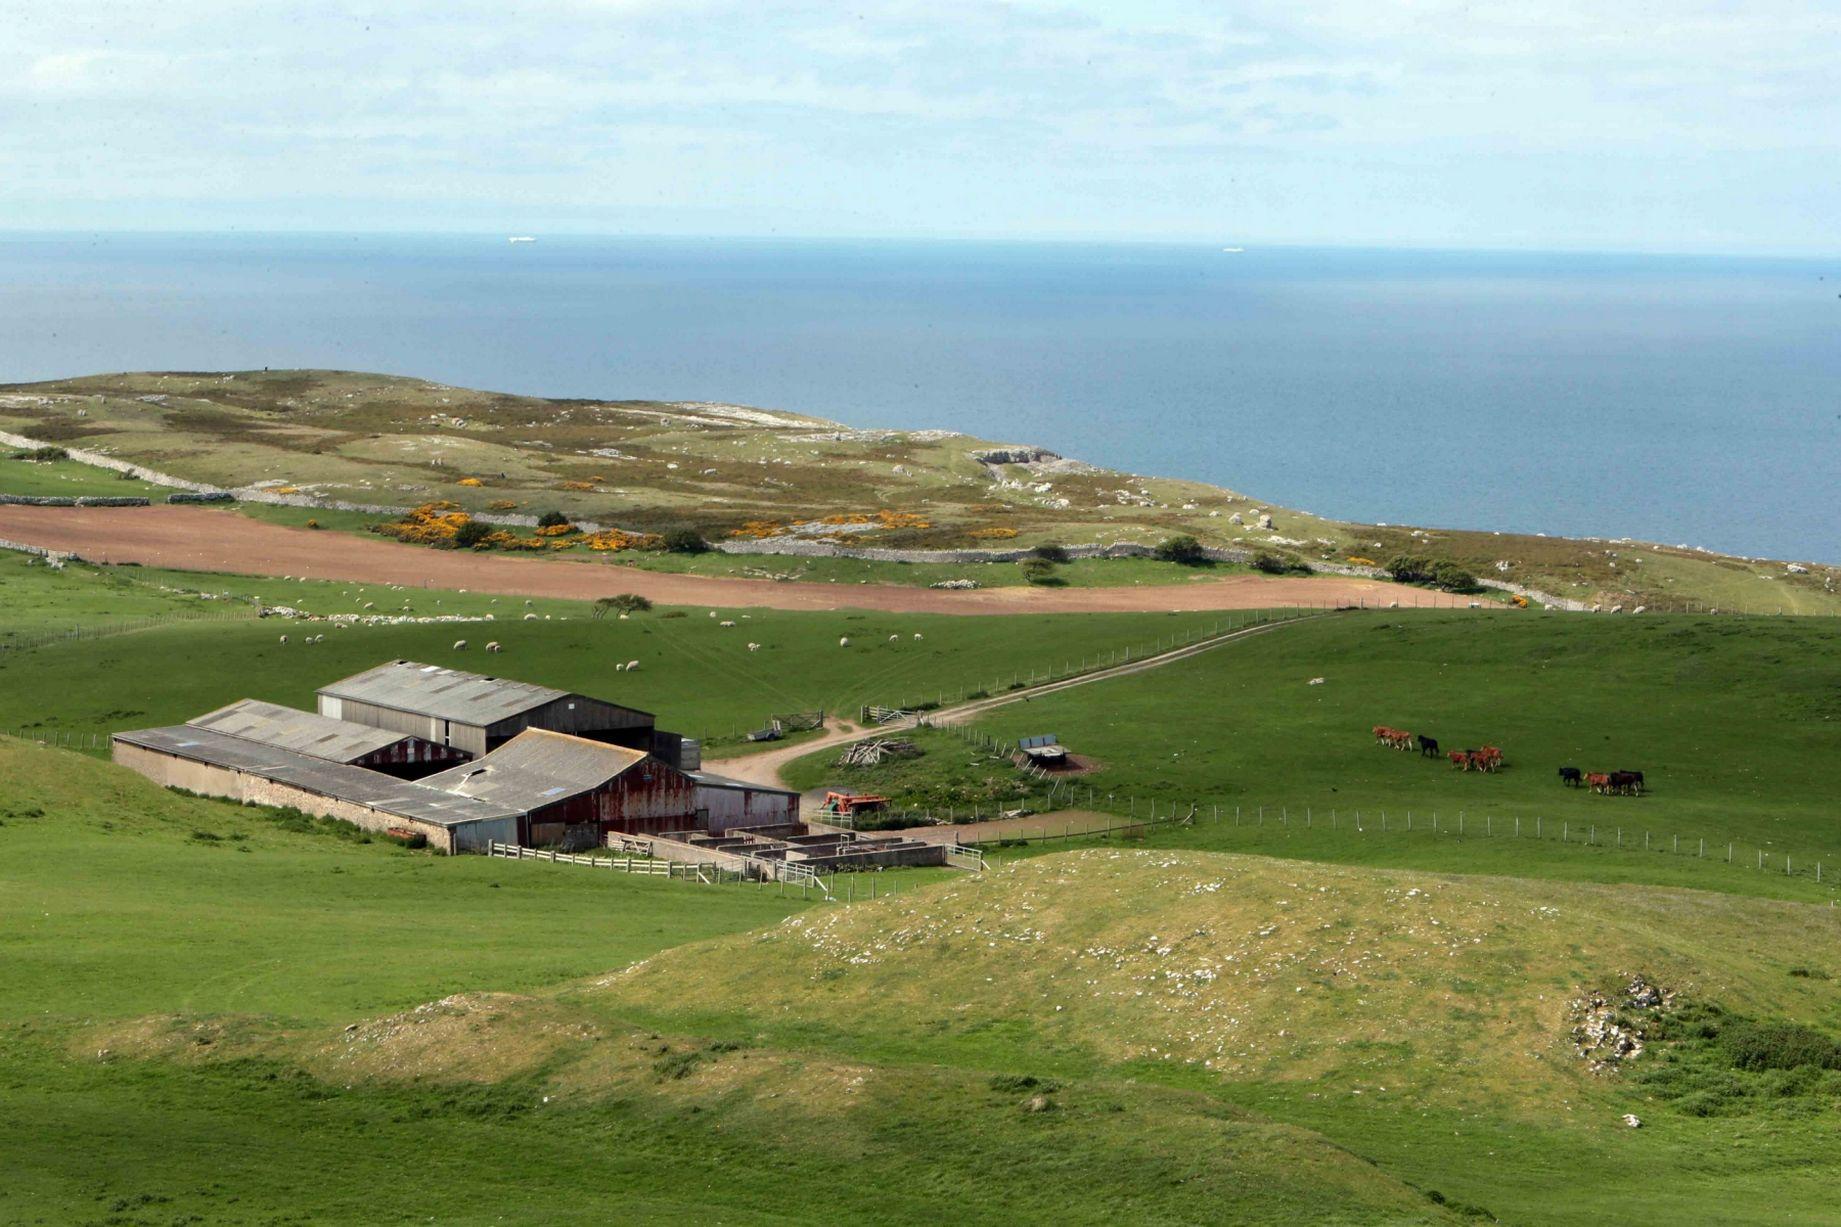 Britain's National Trust will rent out its Parc Farm on the Great Orme to a young farmer. 